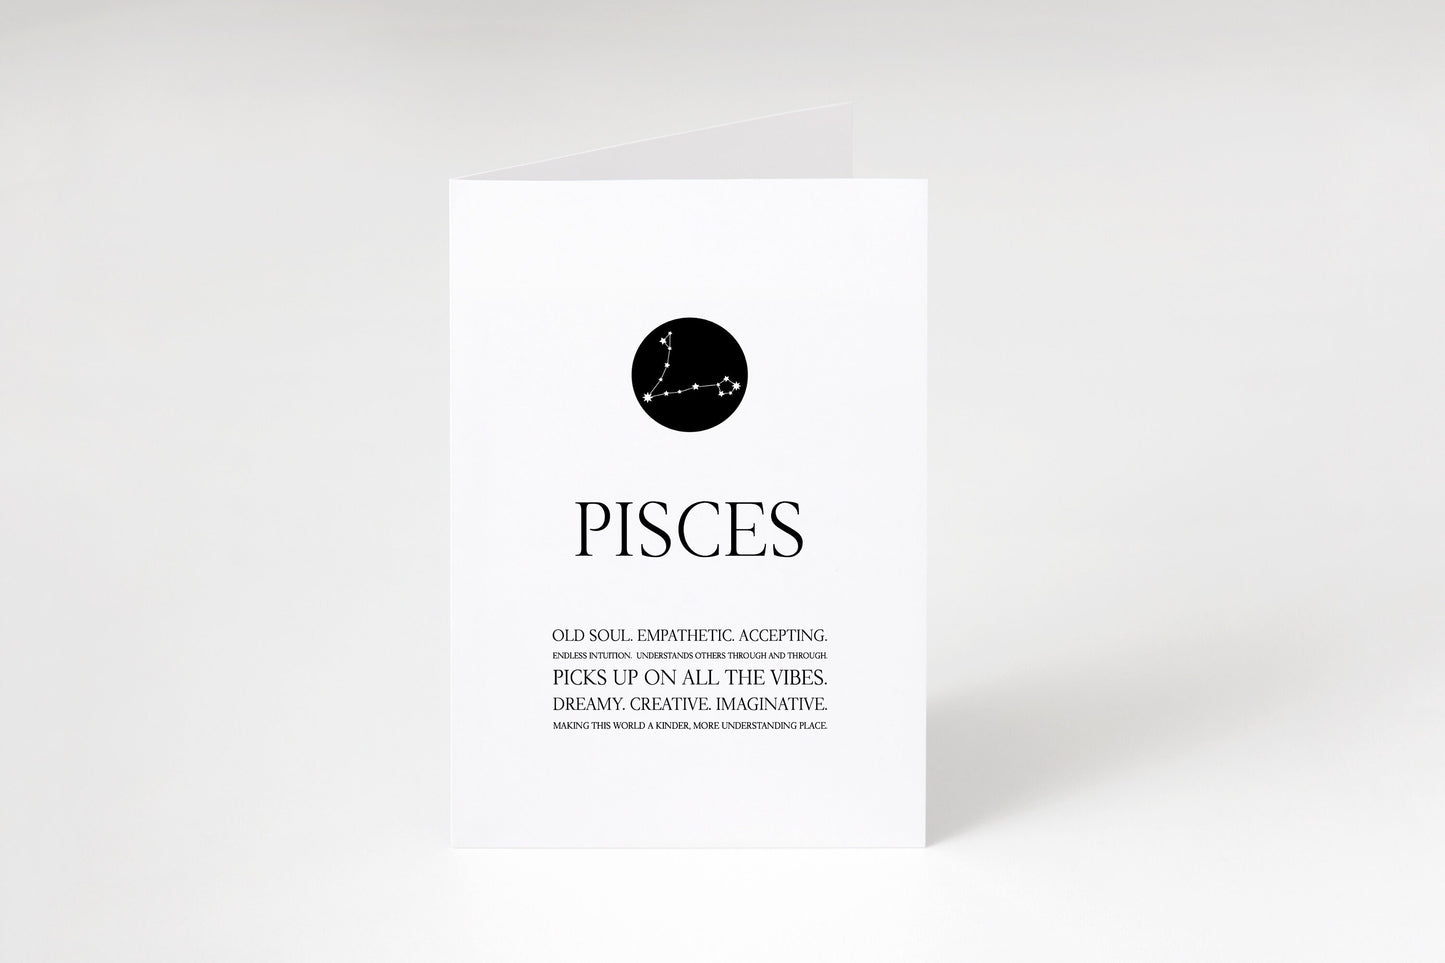 Pisces greeting card,Zodiac Pisces card,Zodiac birthday card,Pisces constellation card,Astrology card,Pisces gift,Zodiac greeting card